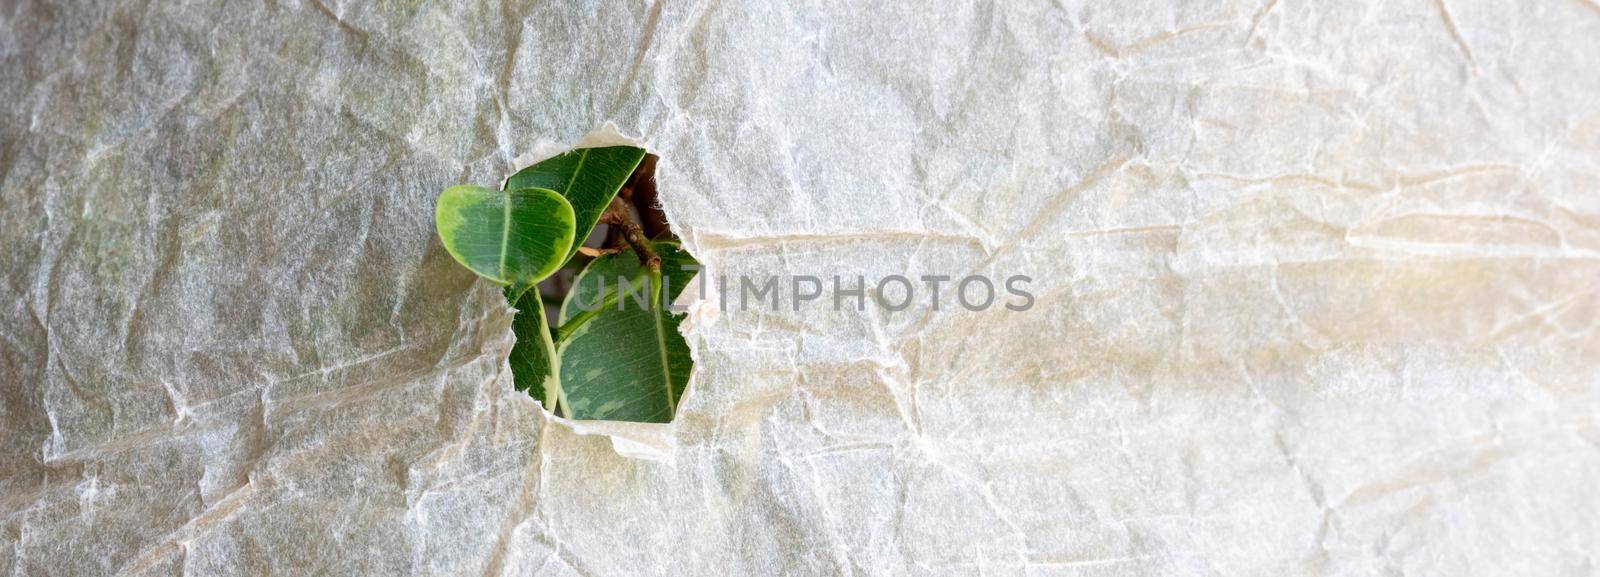 Bright green leaves of the plant in a hole on crumpled craft paper. Environmental concept. Place for your text by lapushka62